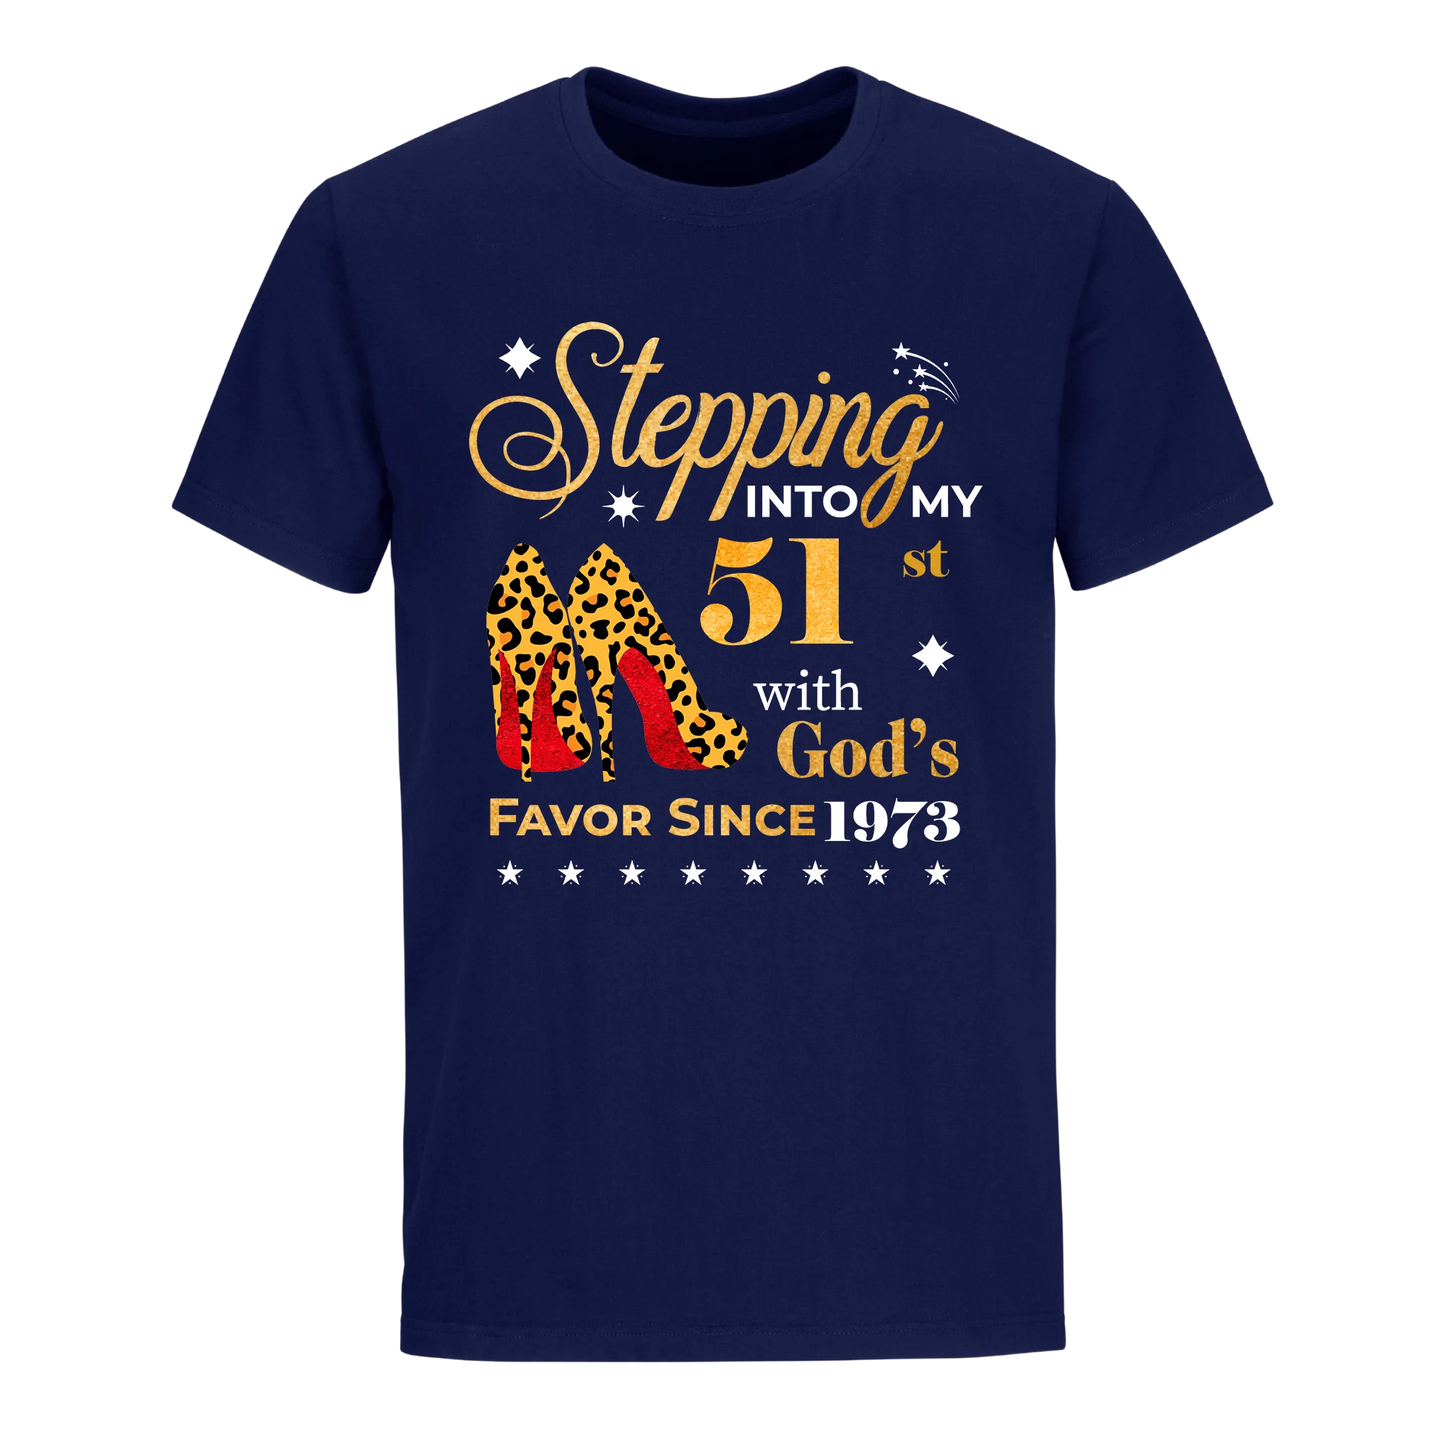 STEPPING INTO MY 51ST WITH GOD'S FAVOR SINCE 1973 UNISEX SHIRT